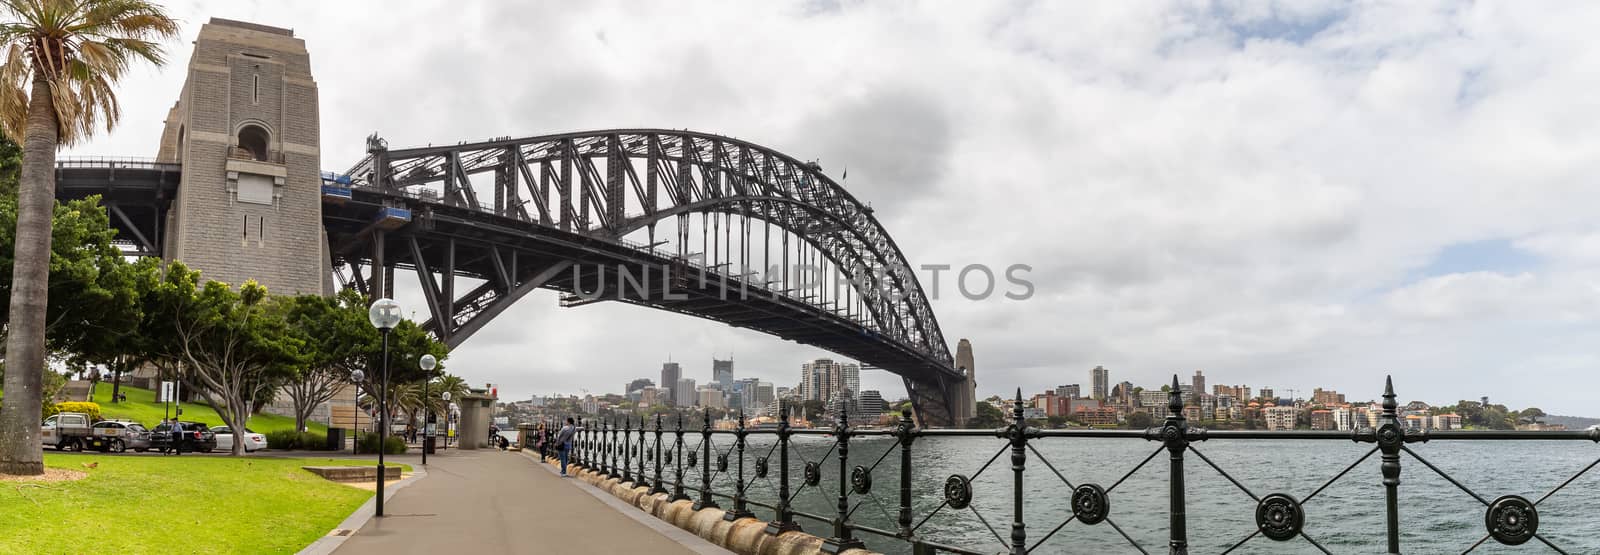 Sydney Harbor, Australia - October 23, 2018: View of Sydney harbor bridge. Cars parked next to it and tourists walking underneath it.